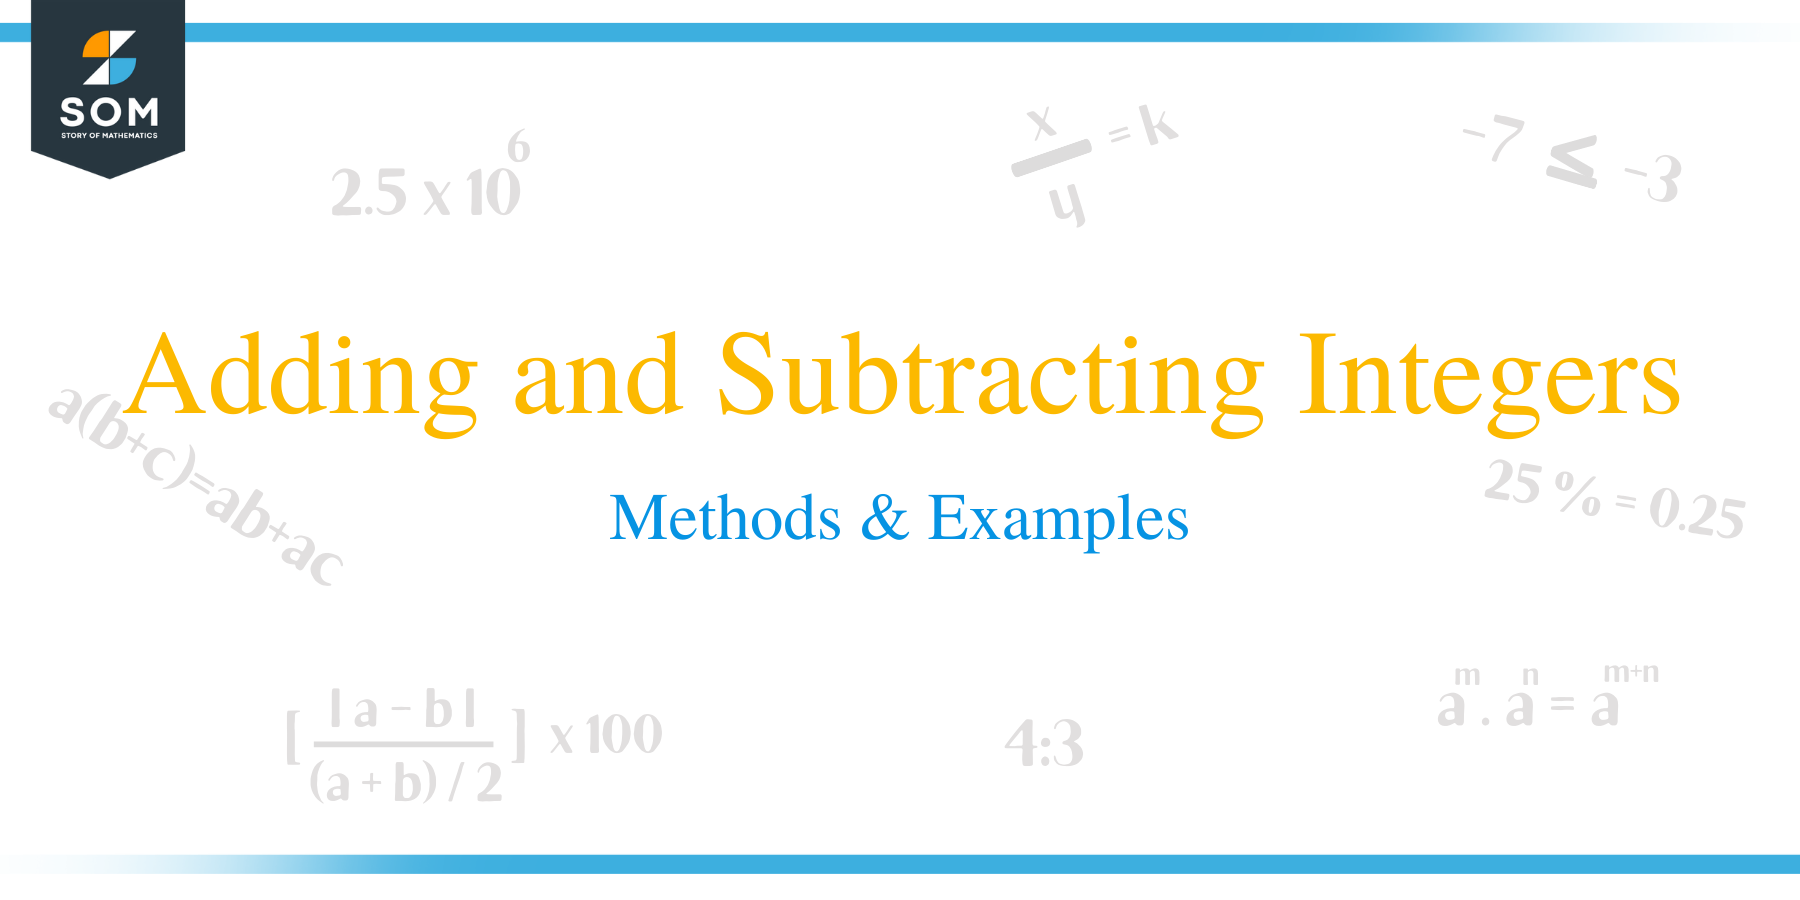 Adding and Subtracting Integers